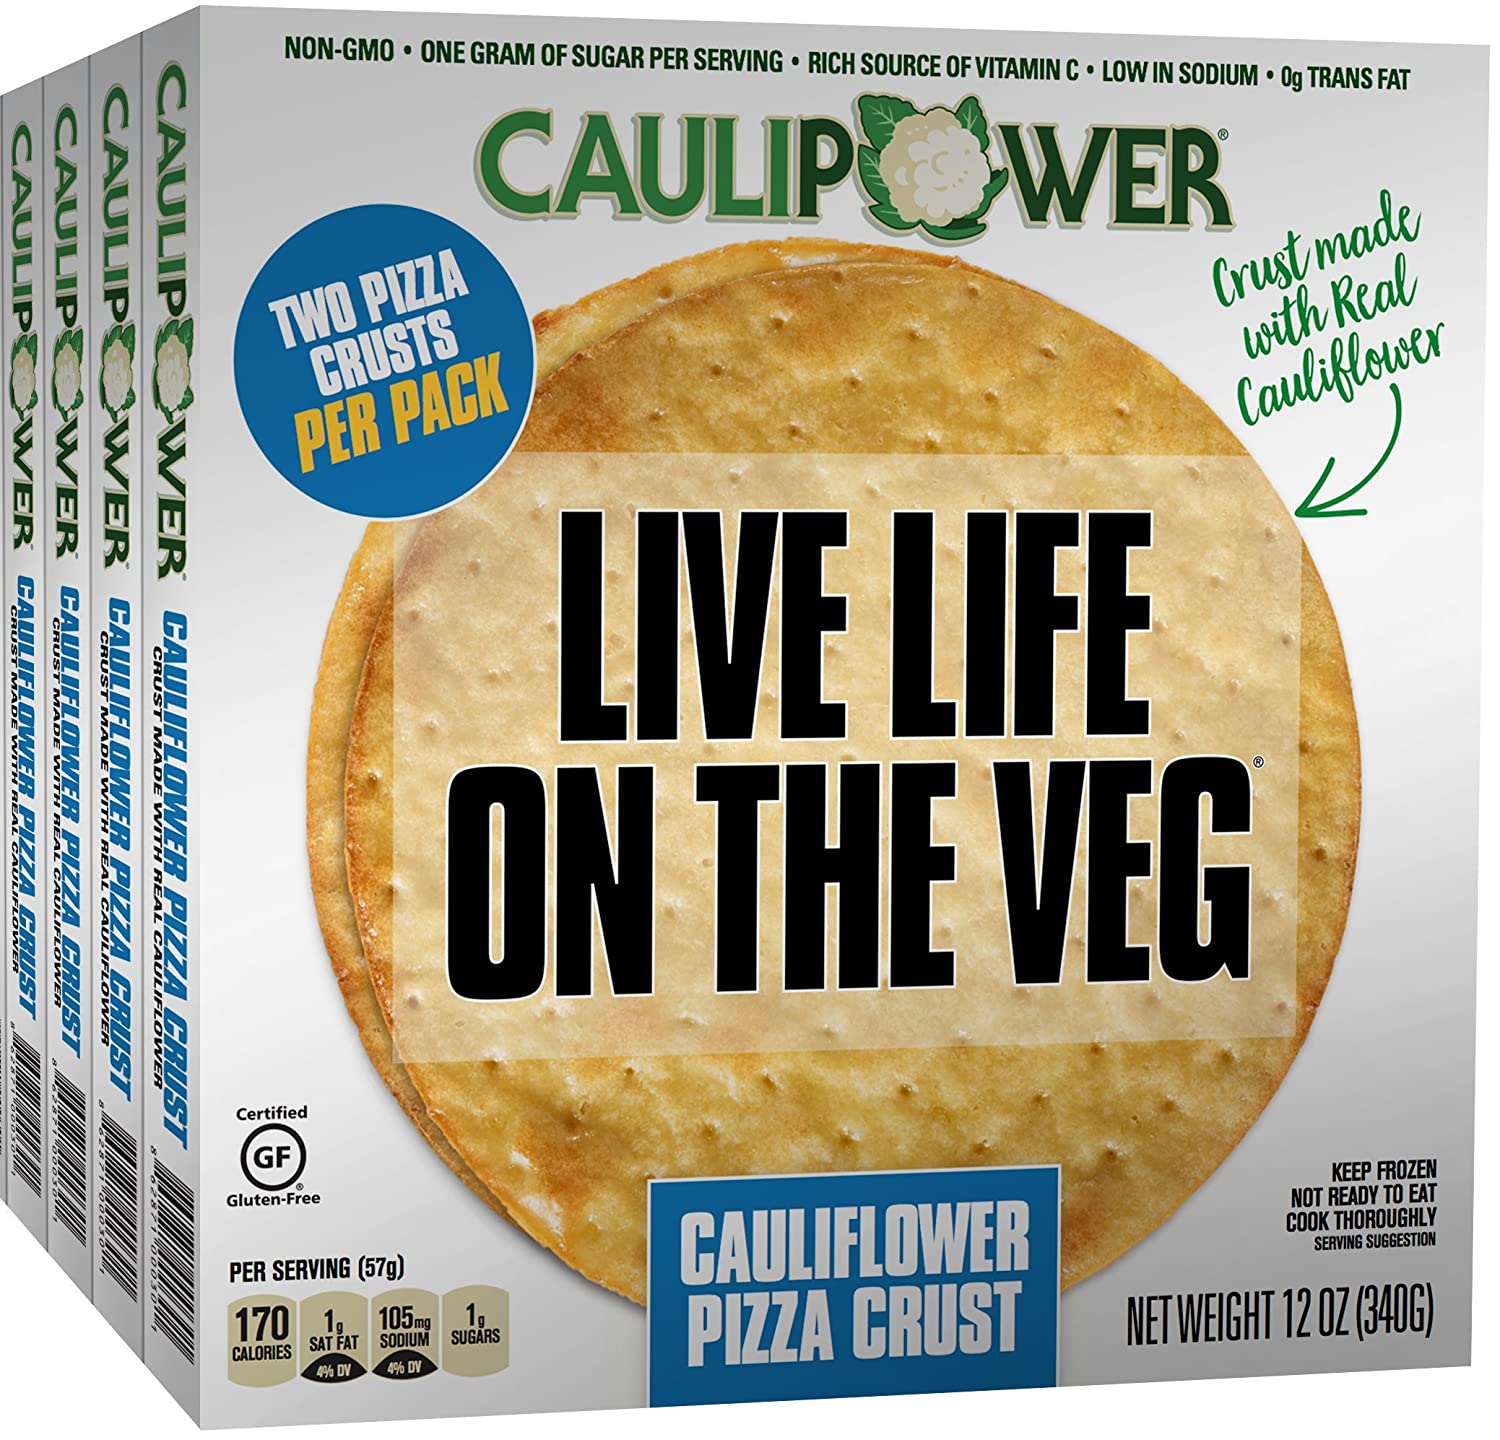 The best gluten-free pizza brands from our readers: Caulipower Pizza Crust 